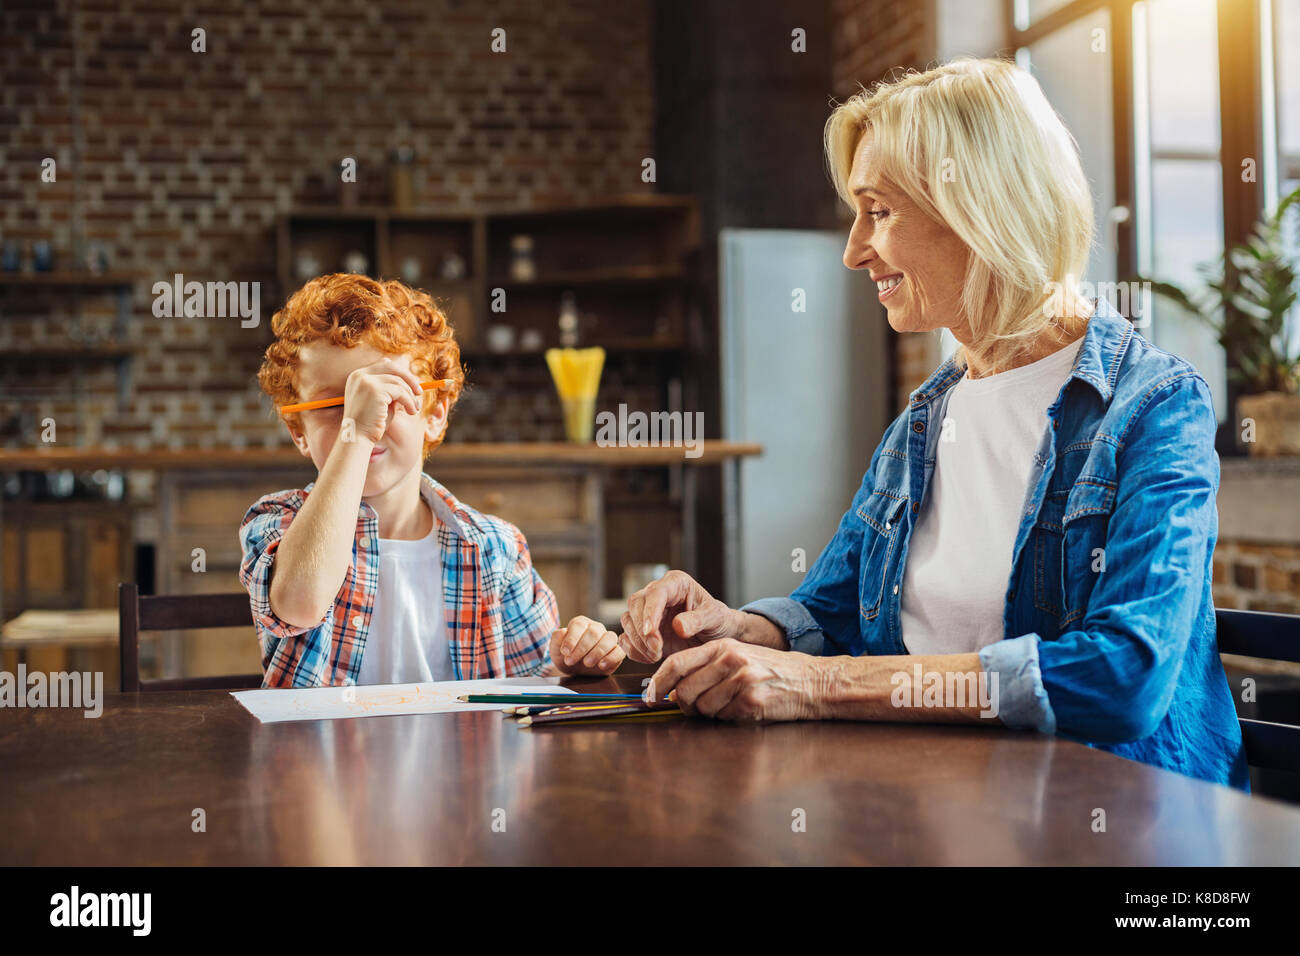 Smiling grandma looking at grandson fooling with pencil Stock Photo